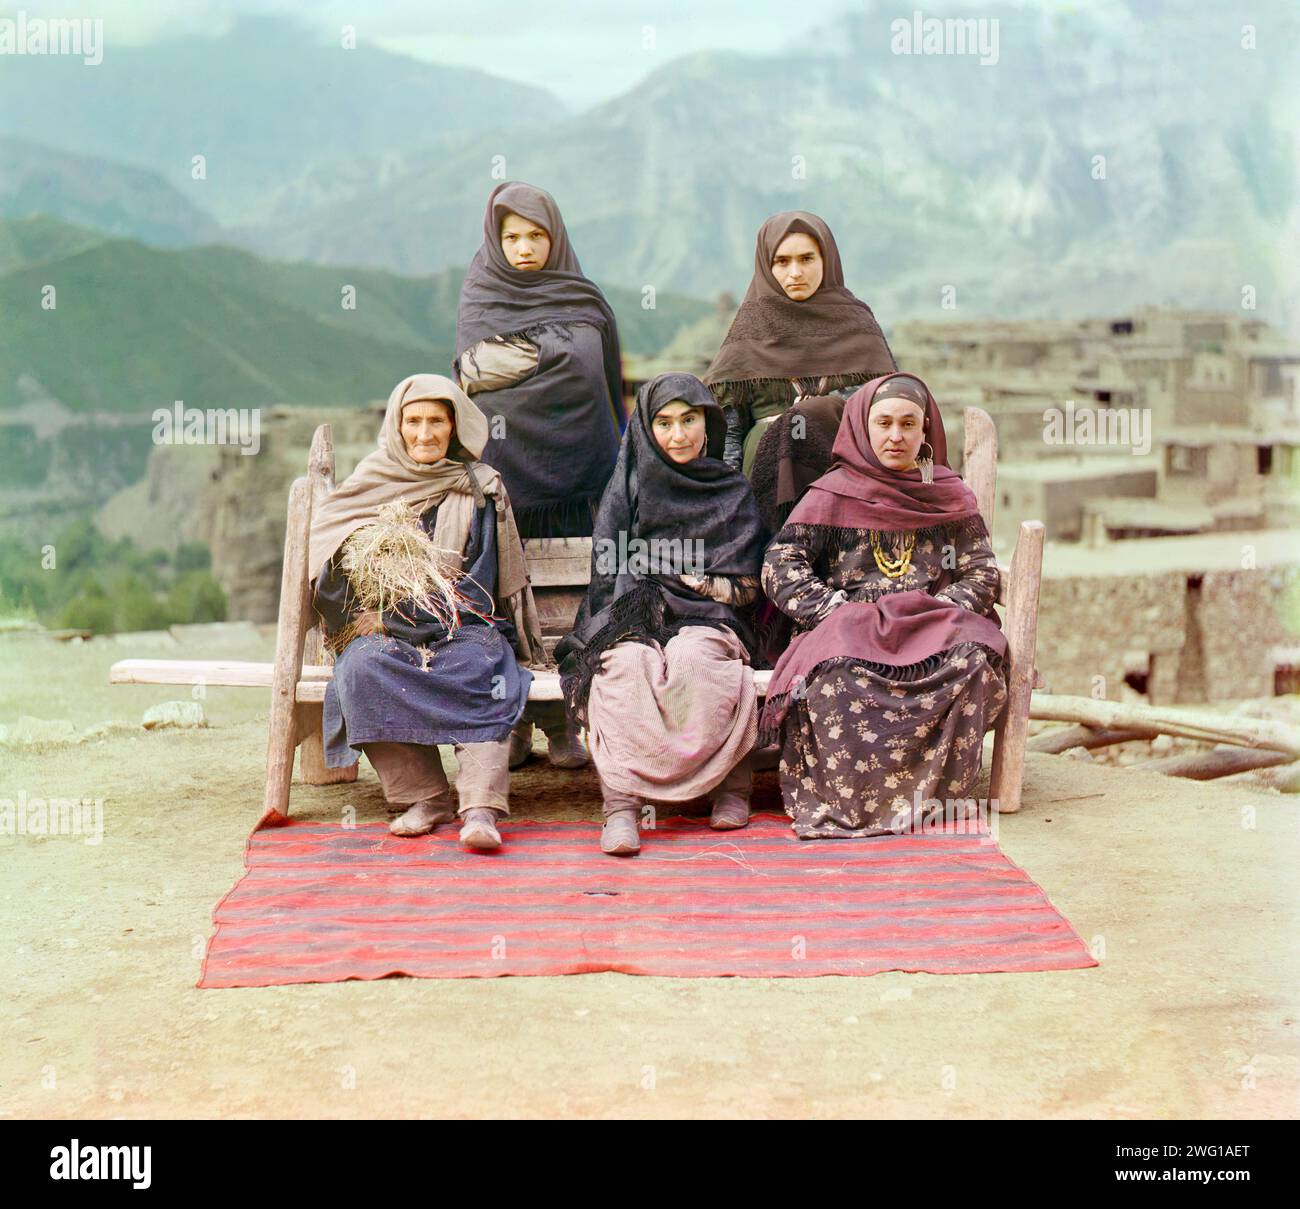 Dagestani types, between 1905 and 1915. Group of women (from the Caucasus) posed outdoors. Stock Photo